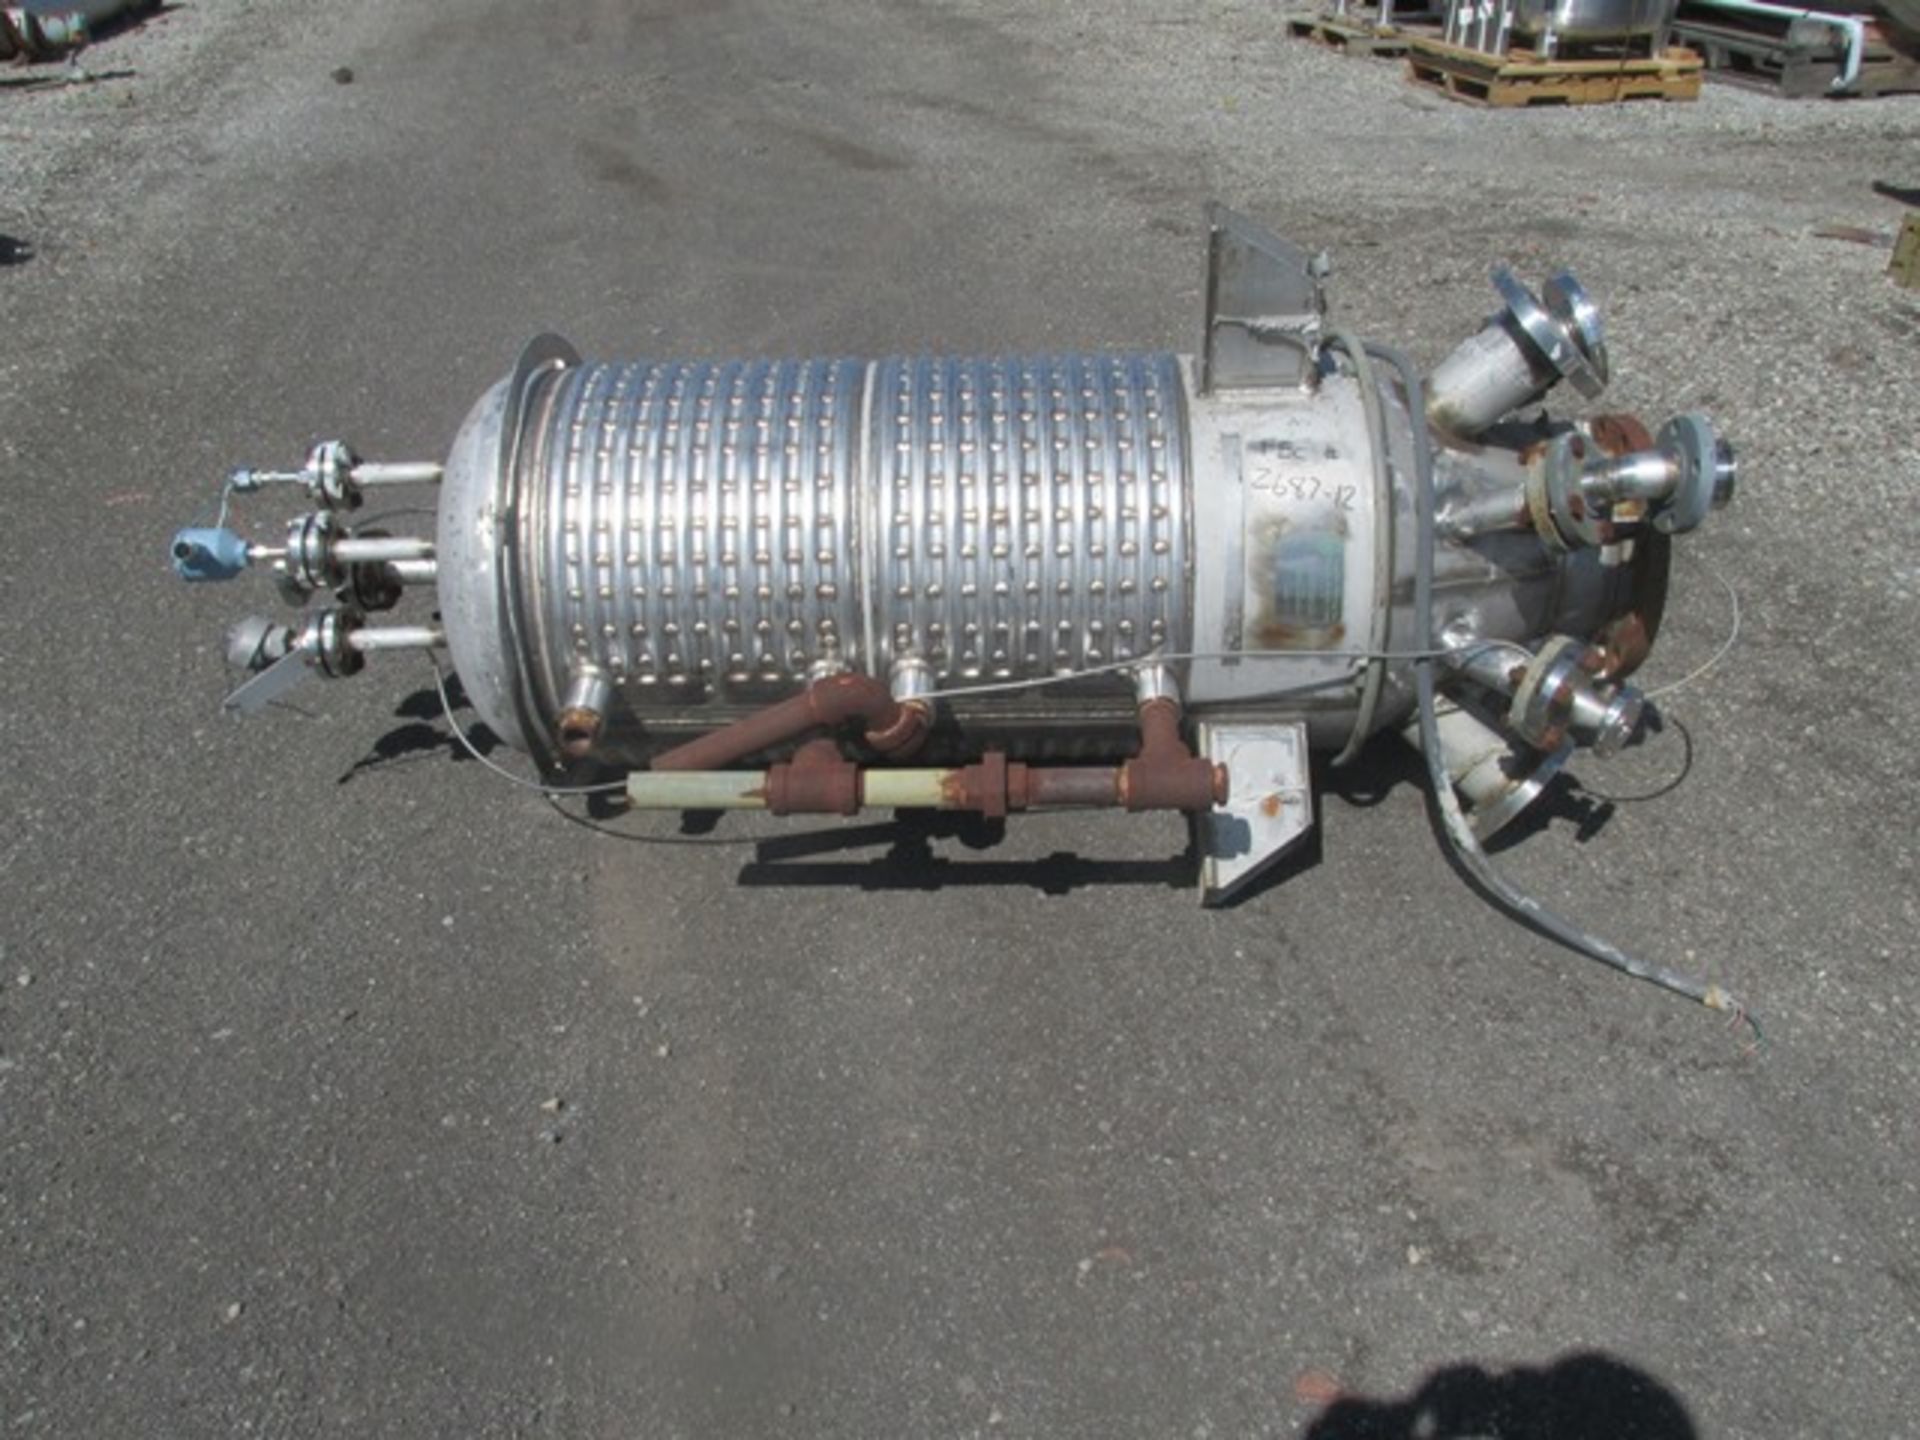 100 gallon Tolan reactor body, stainless steel construction,approx. 24" diameter x 48" straight side